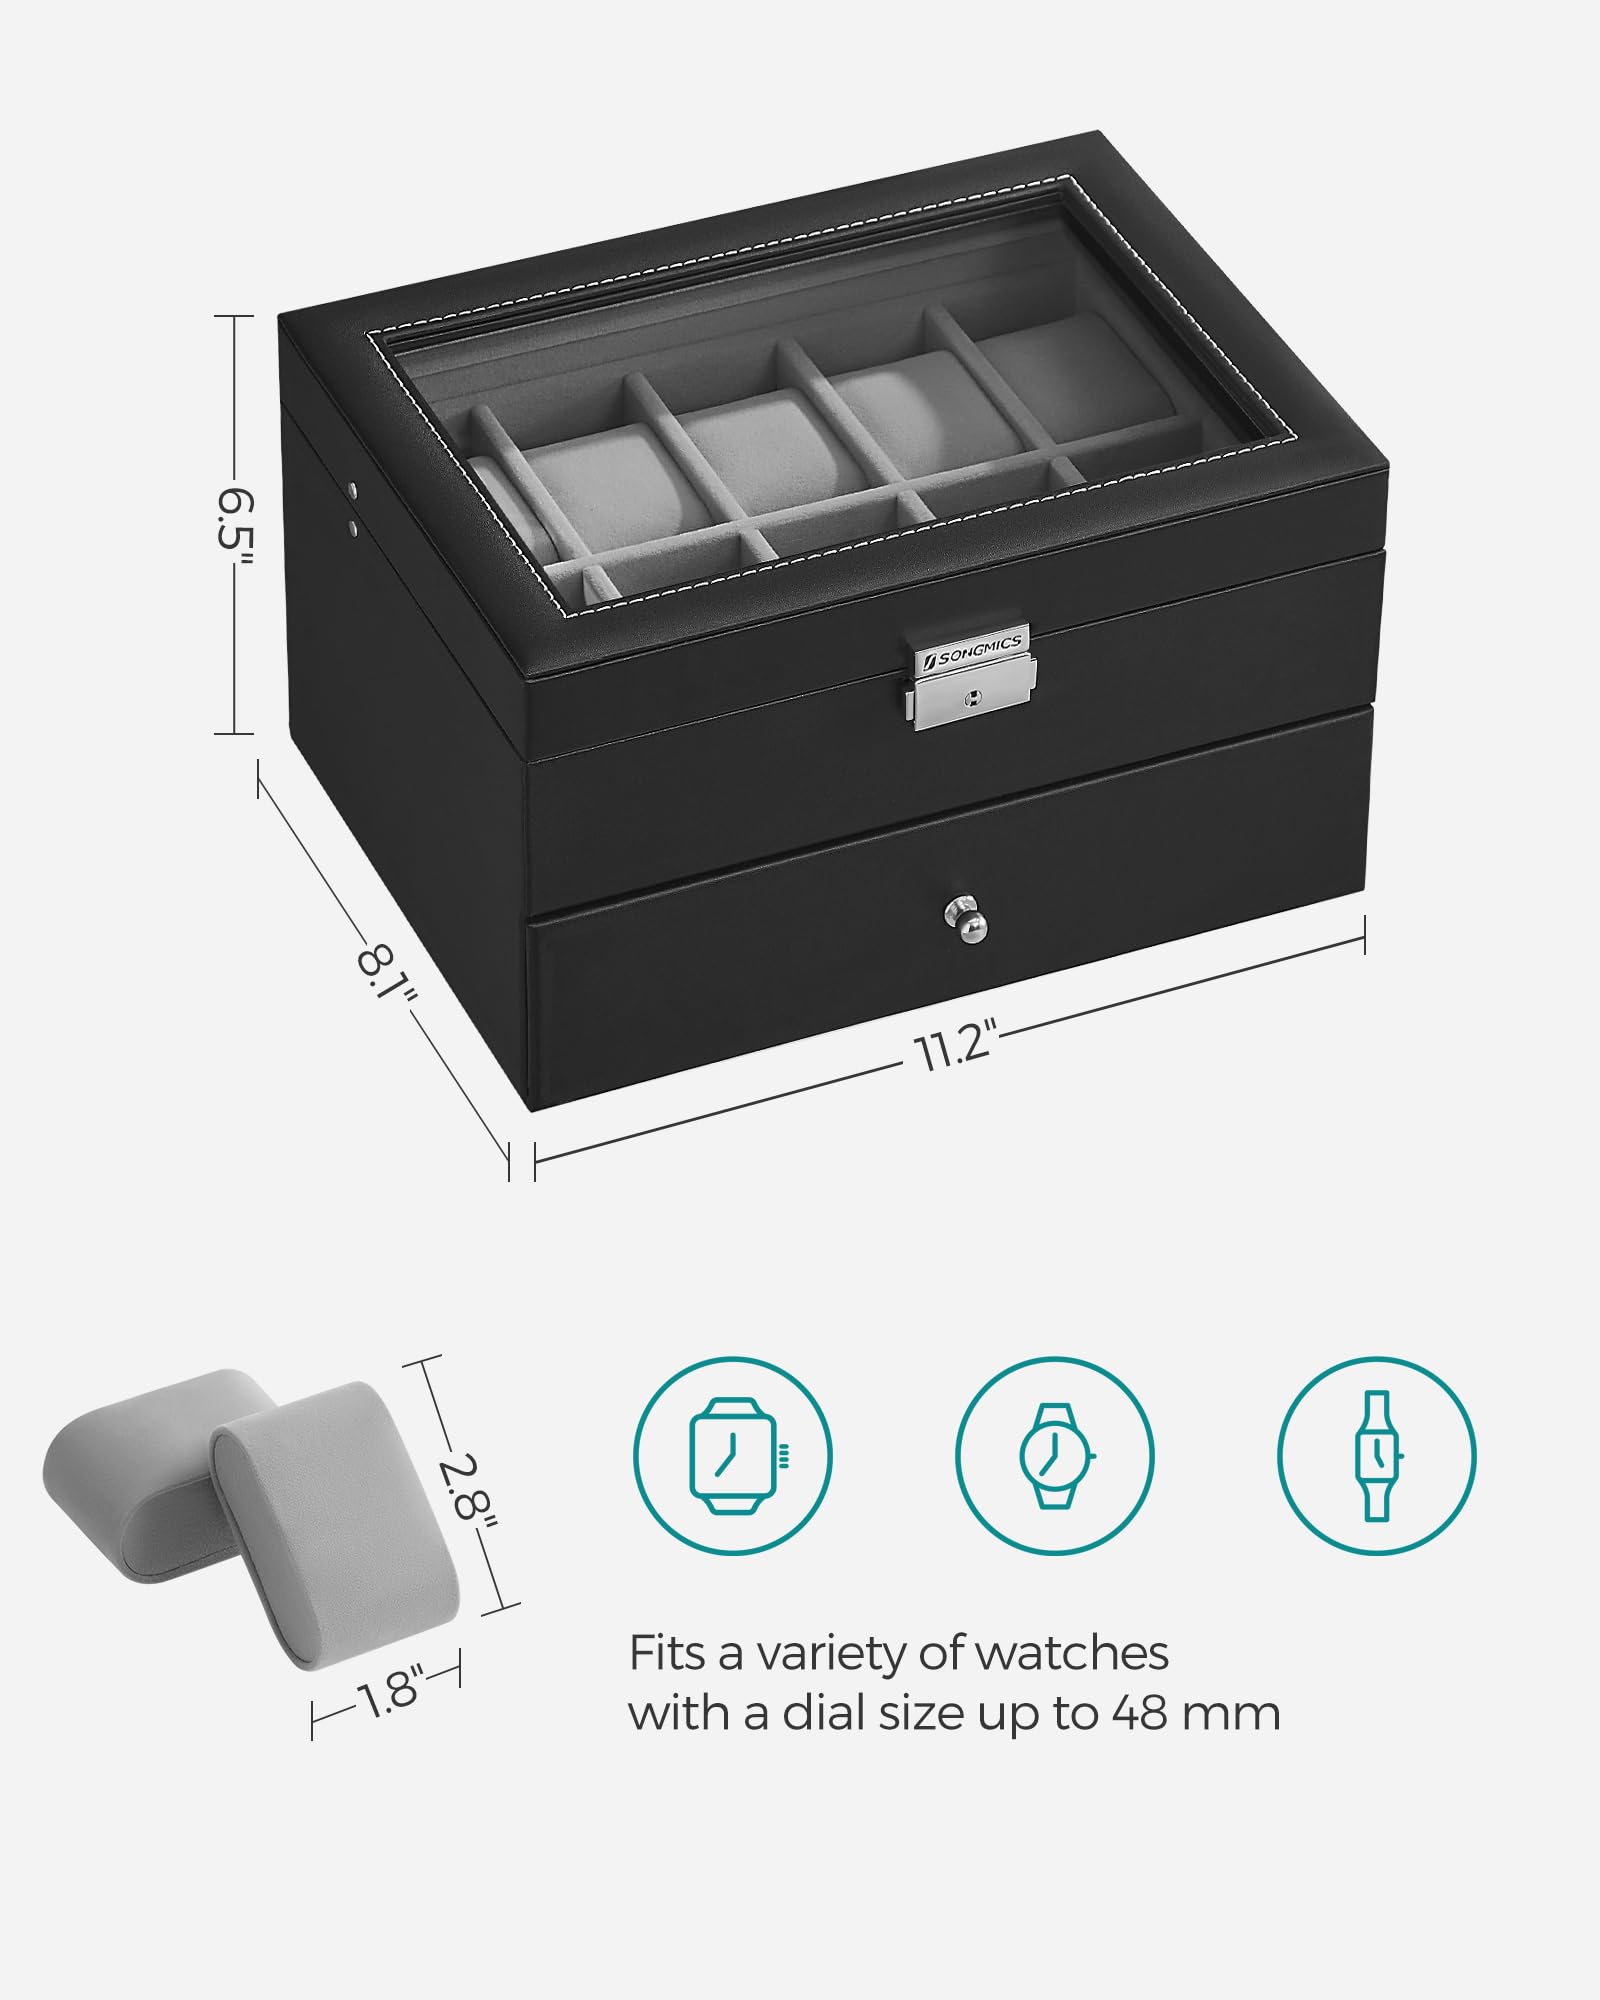 SONGMICS 20-Slot Watch Box, Watch Case with Glass Lid, 2 Layers, Lockable Watch Display Case, Black Synthetic Leather, Gray Lining UJWB006